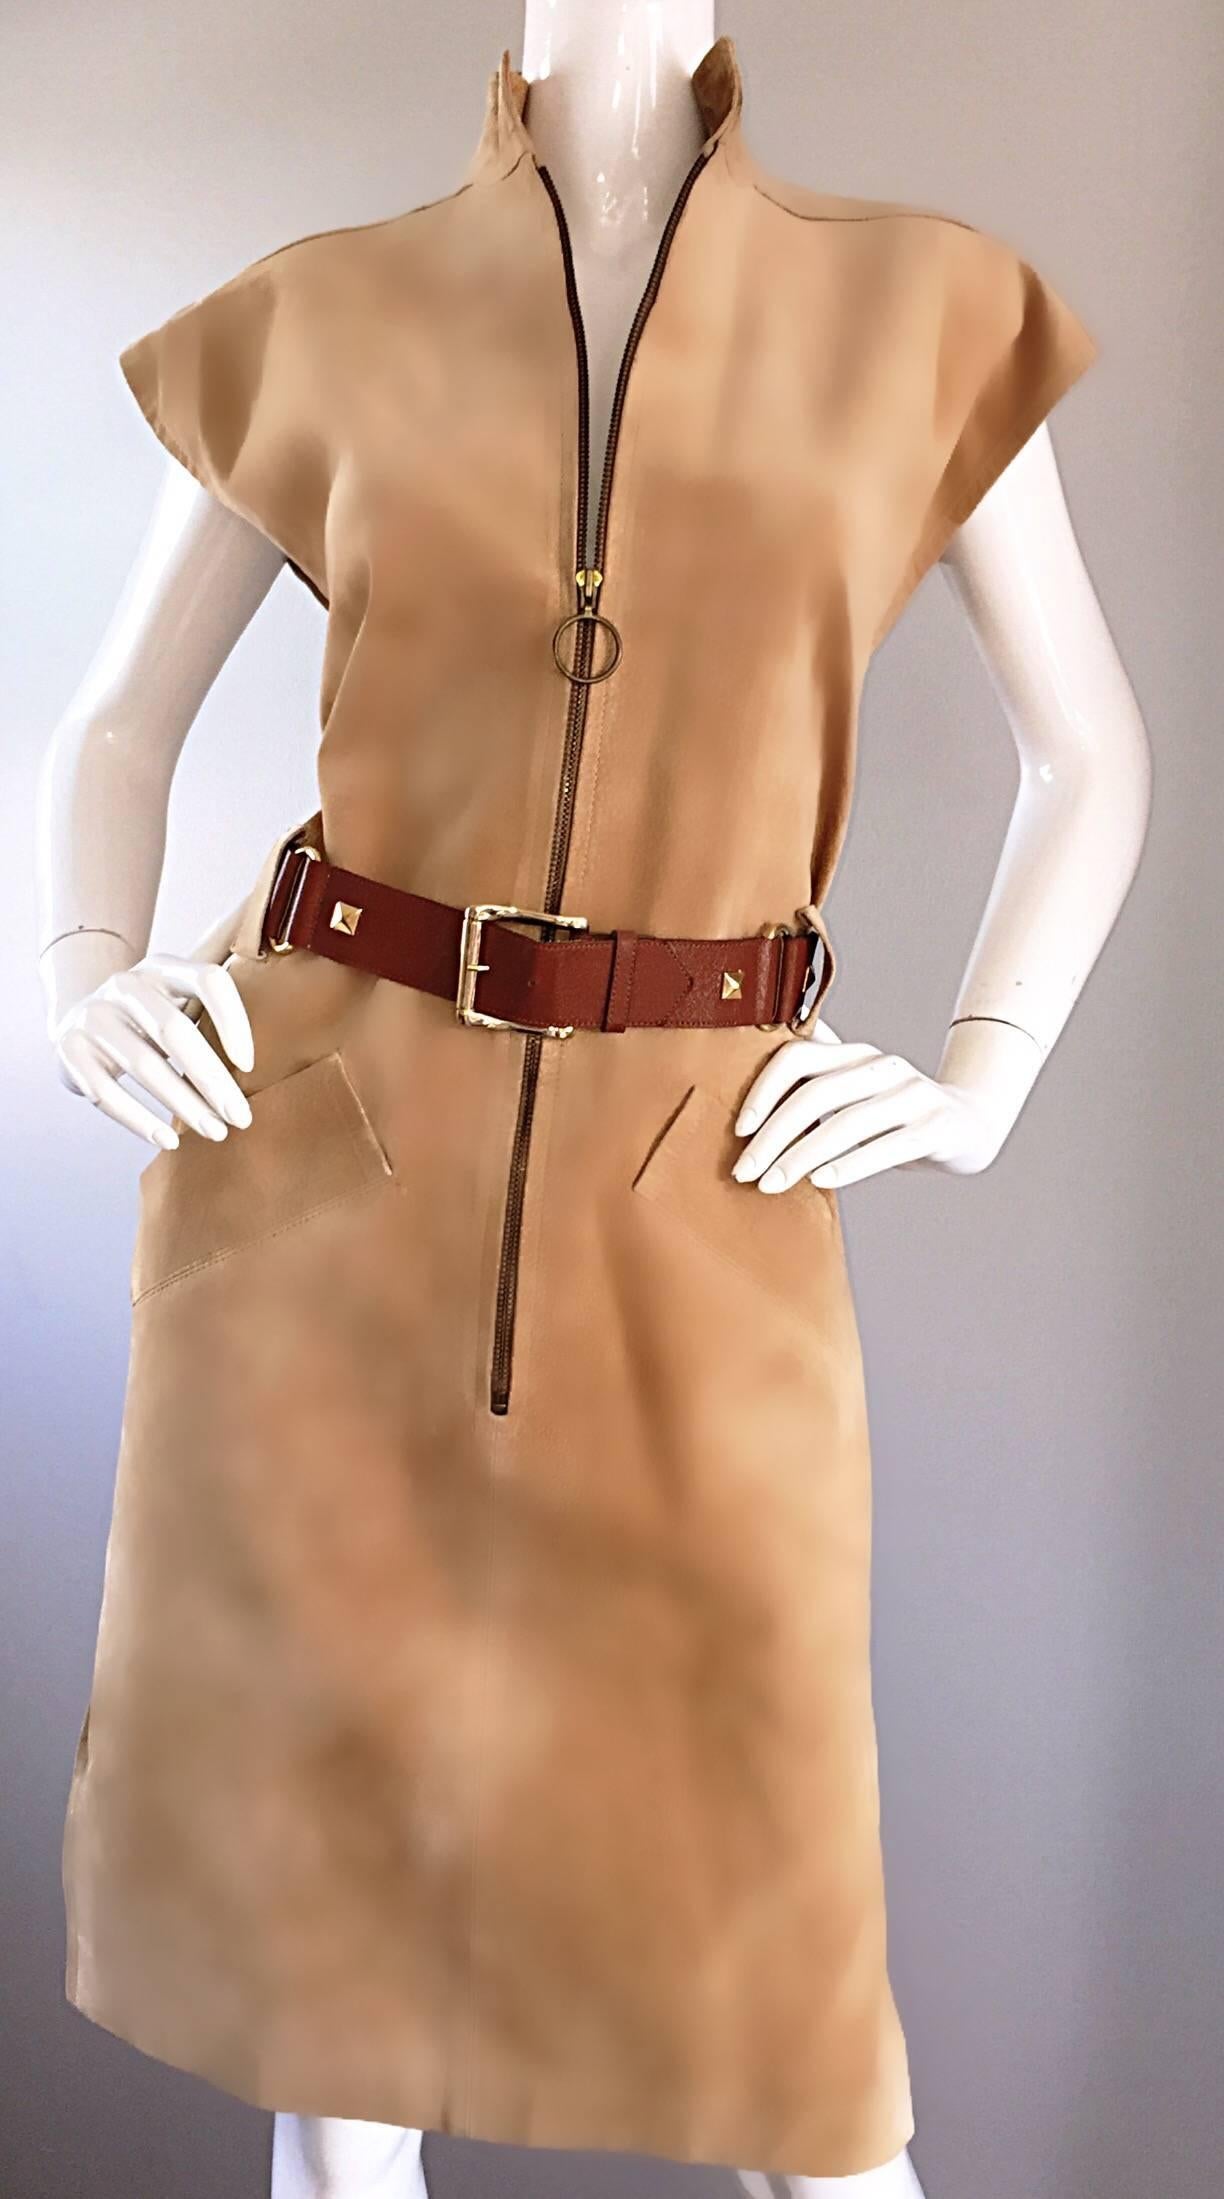 Women's YSL Yves Saint Laurent Rive Gauche 1960s Vintage Leather Suede Tan Belted Dress